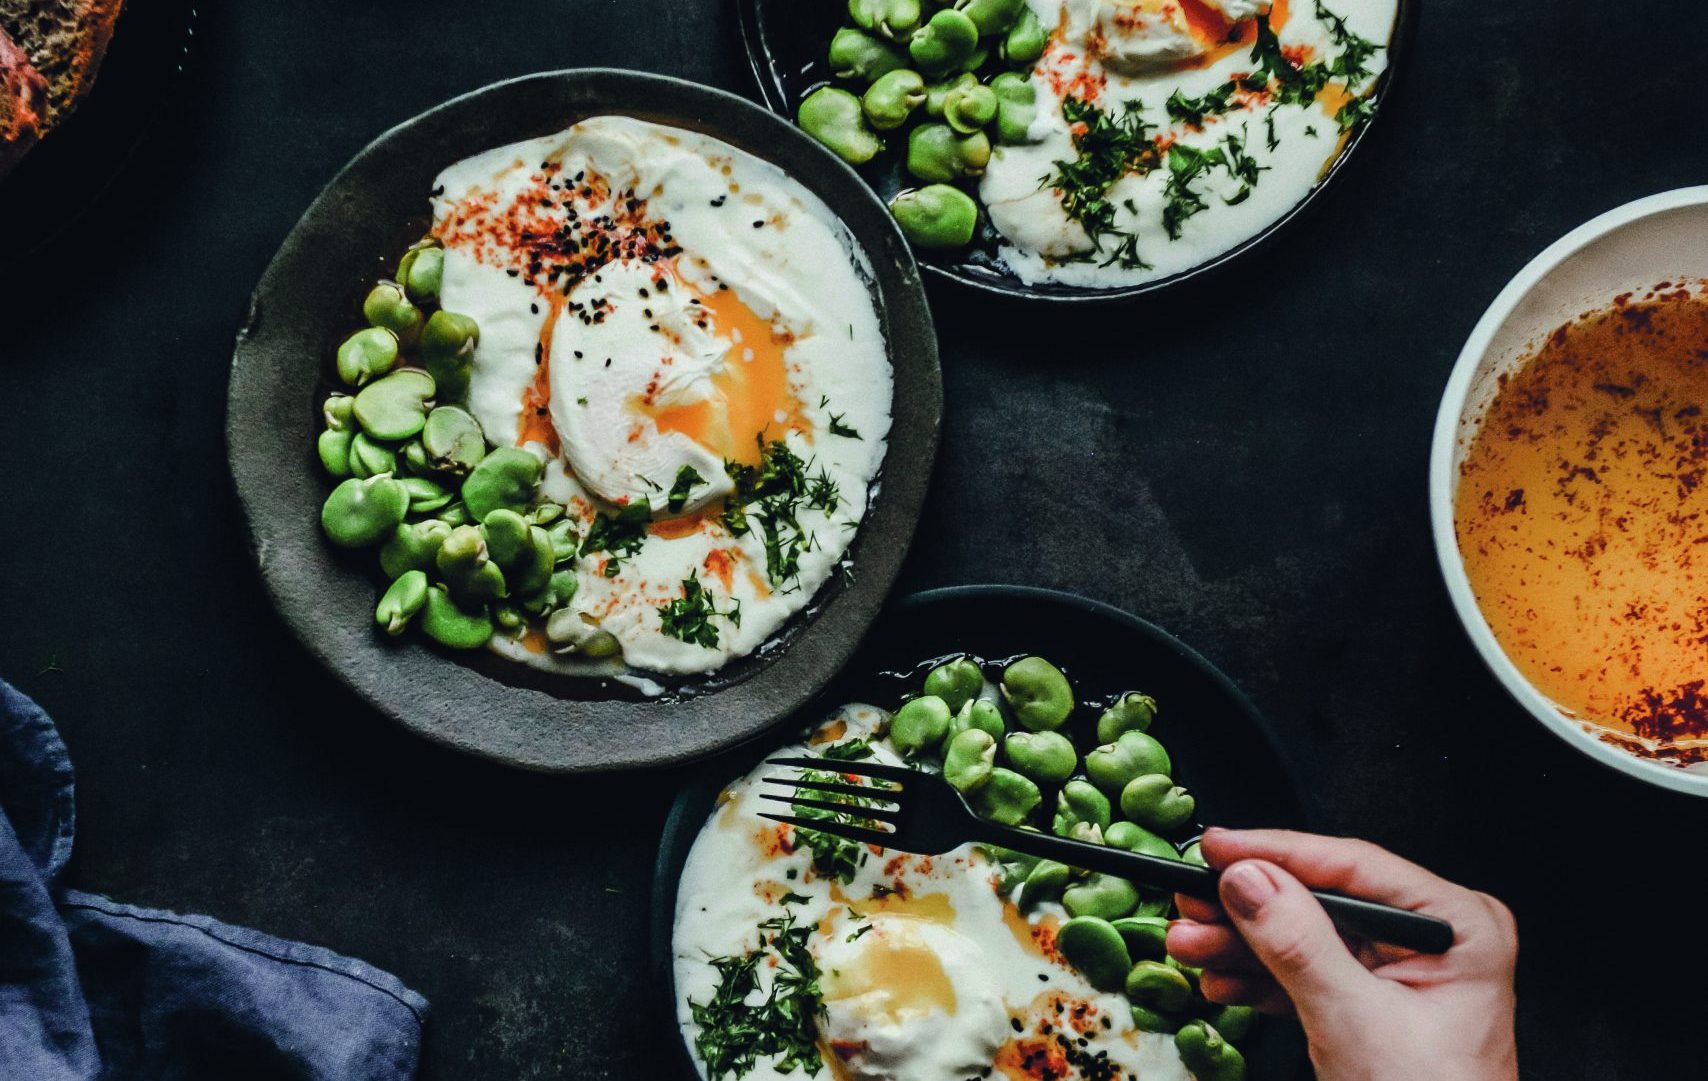 A Turkish breakfast of eggs and broad beans.